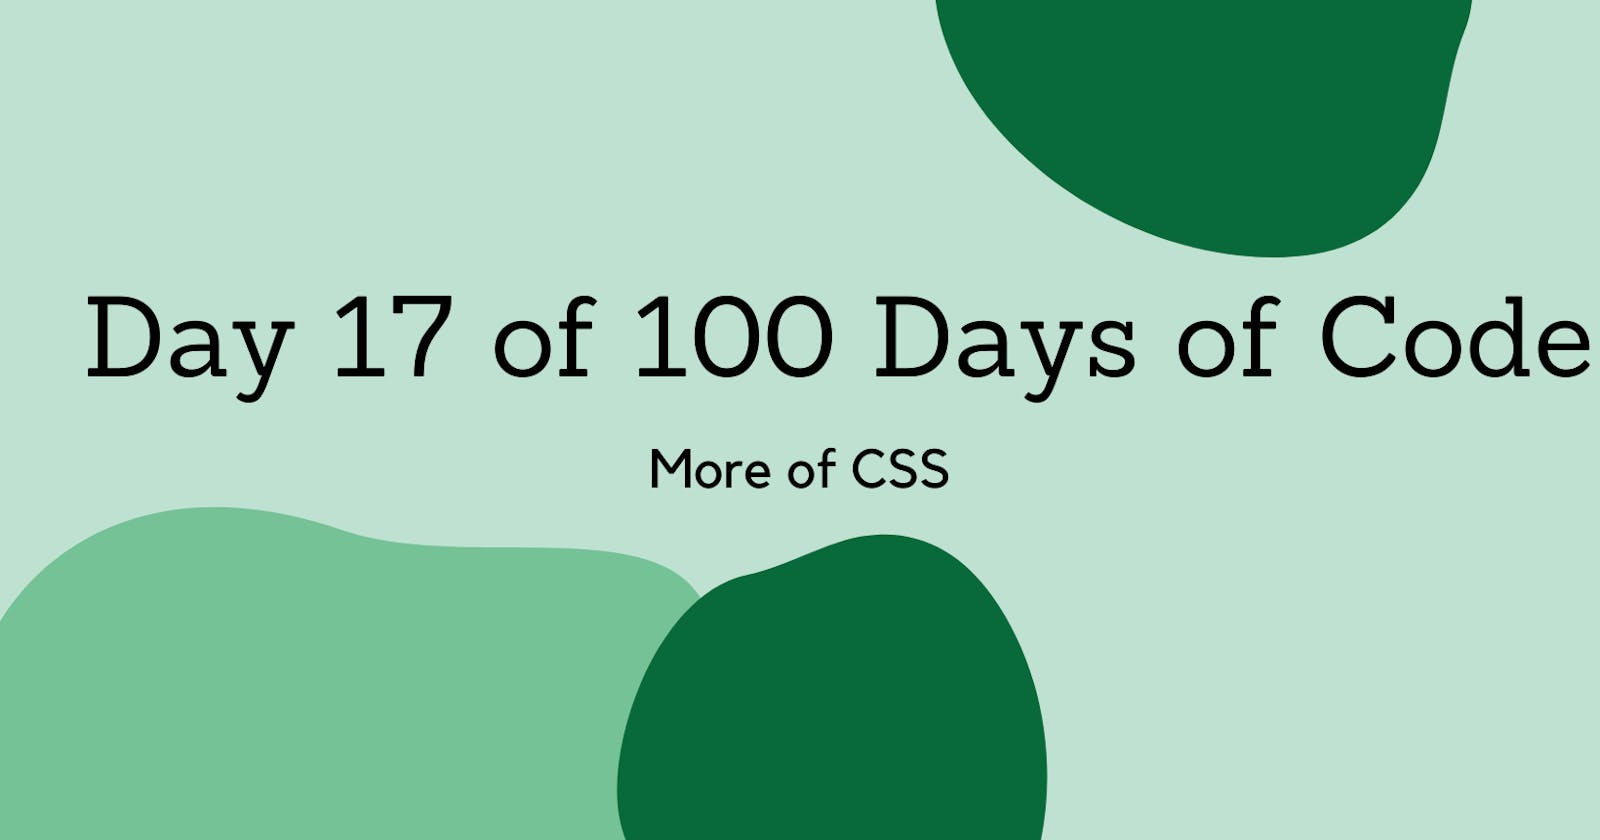 Day 17 of 100 Days of Code